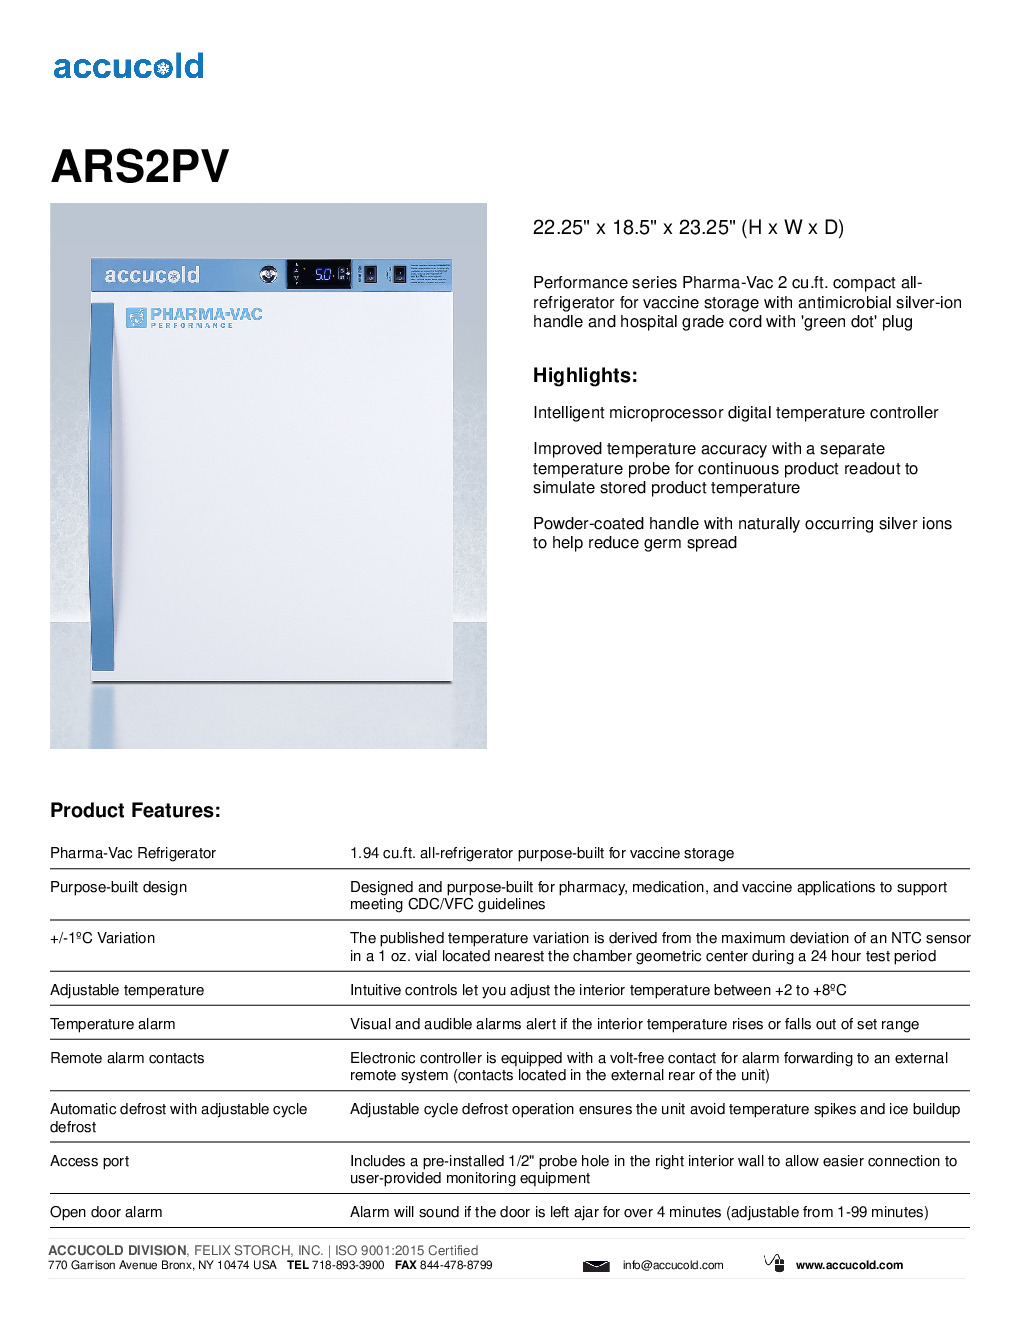 Accucold ARS2PV Medical Refrigerator